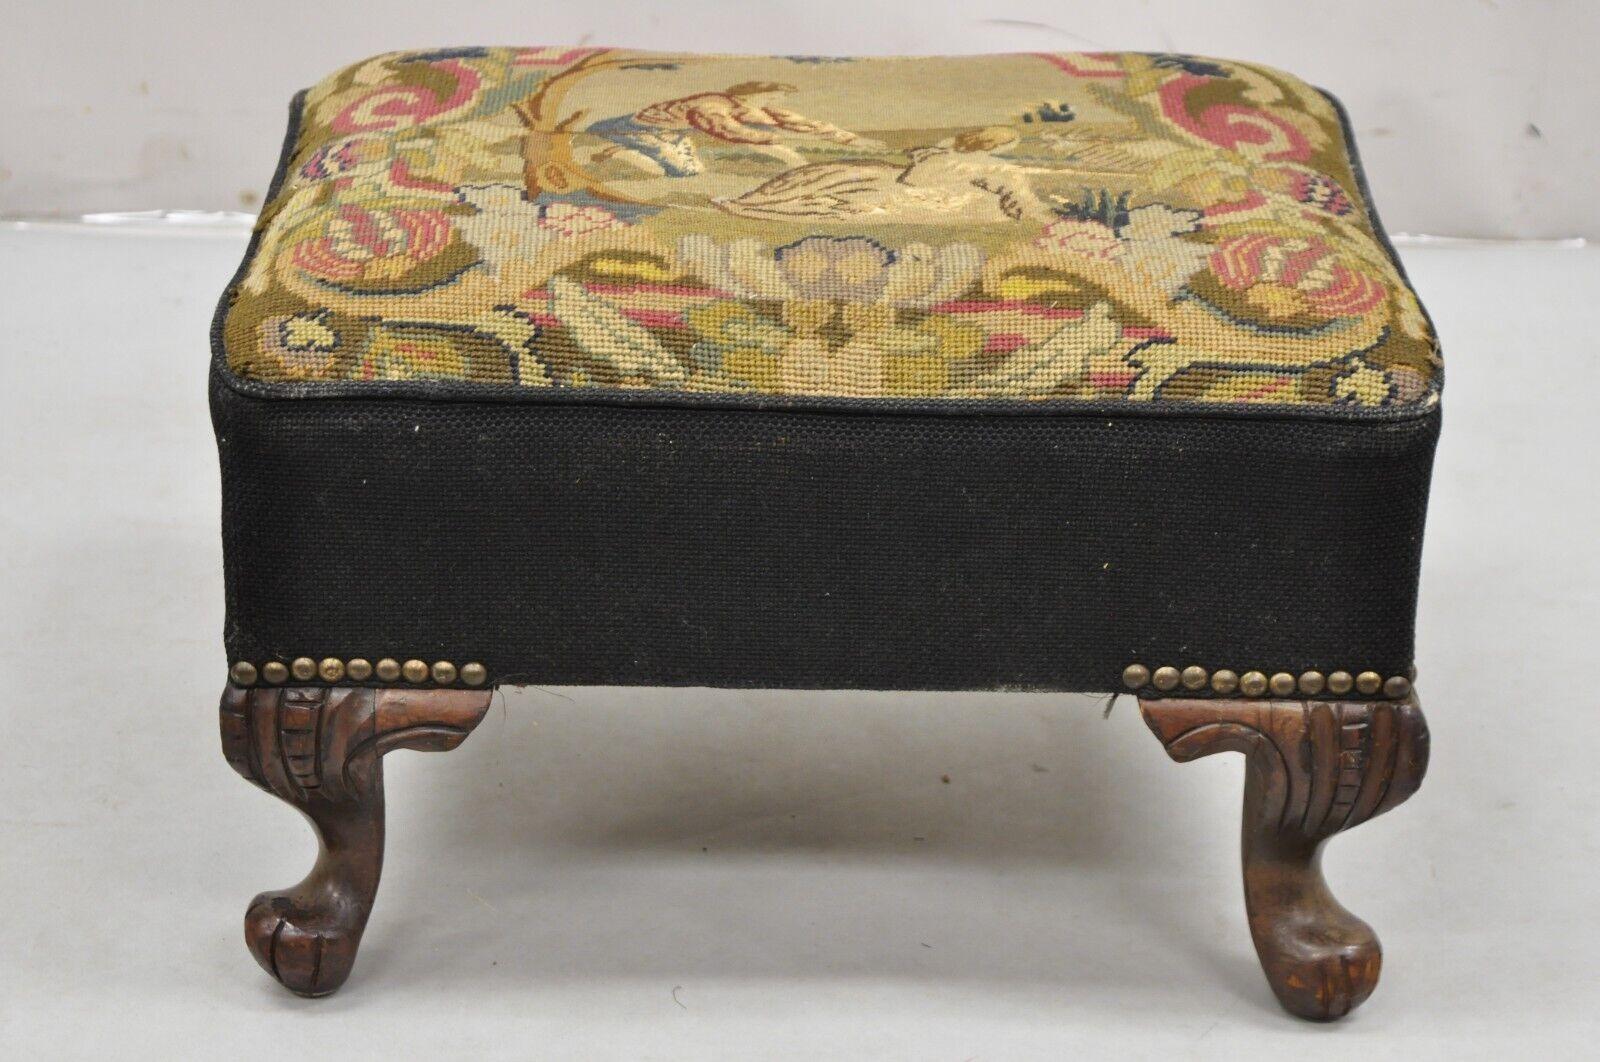 Antique French Figural Needlepoint Box Footstool Ottoman on Mahogany Legs For Sale 5